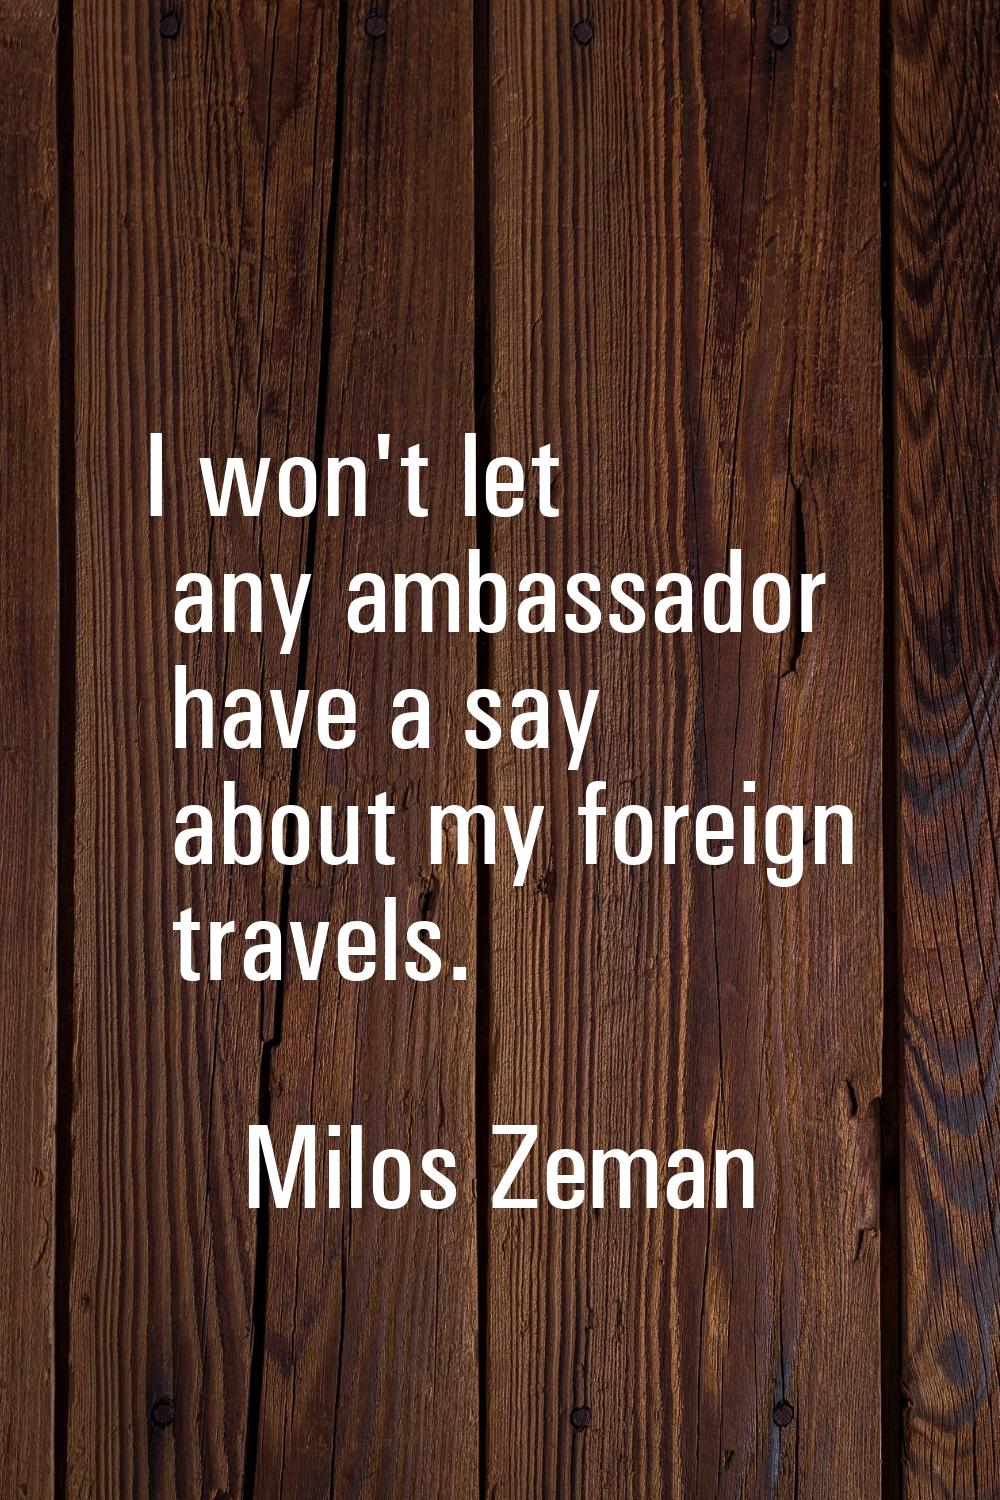 I won't let any ambassador have a say about my foreign travels.